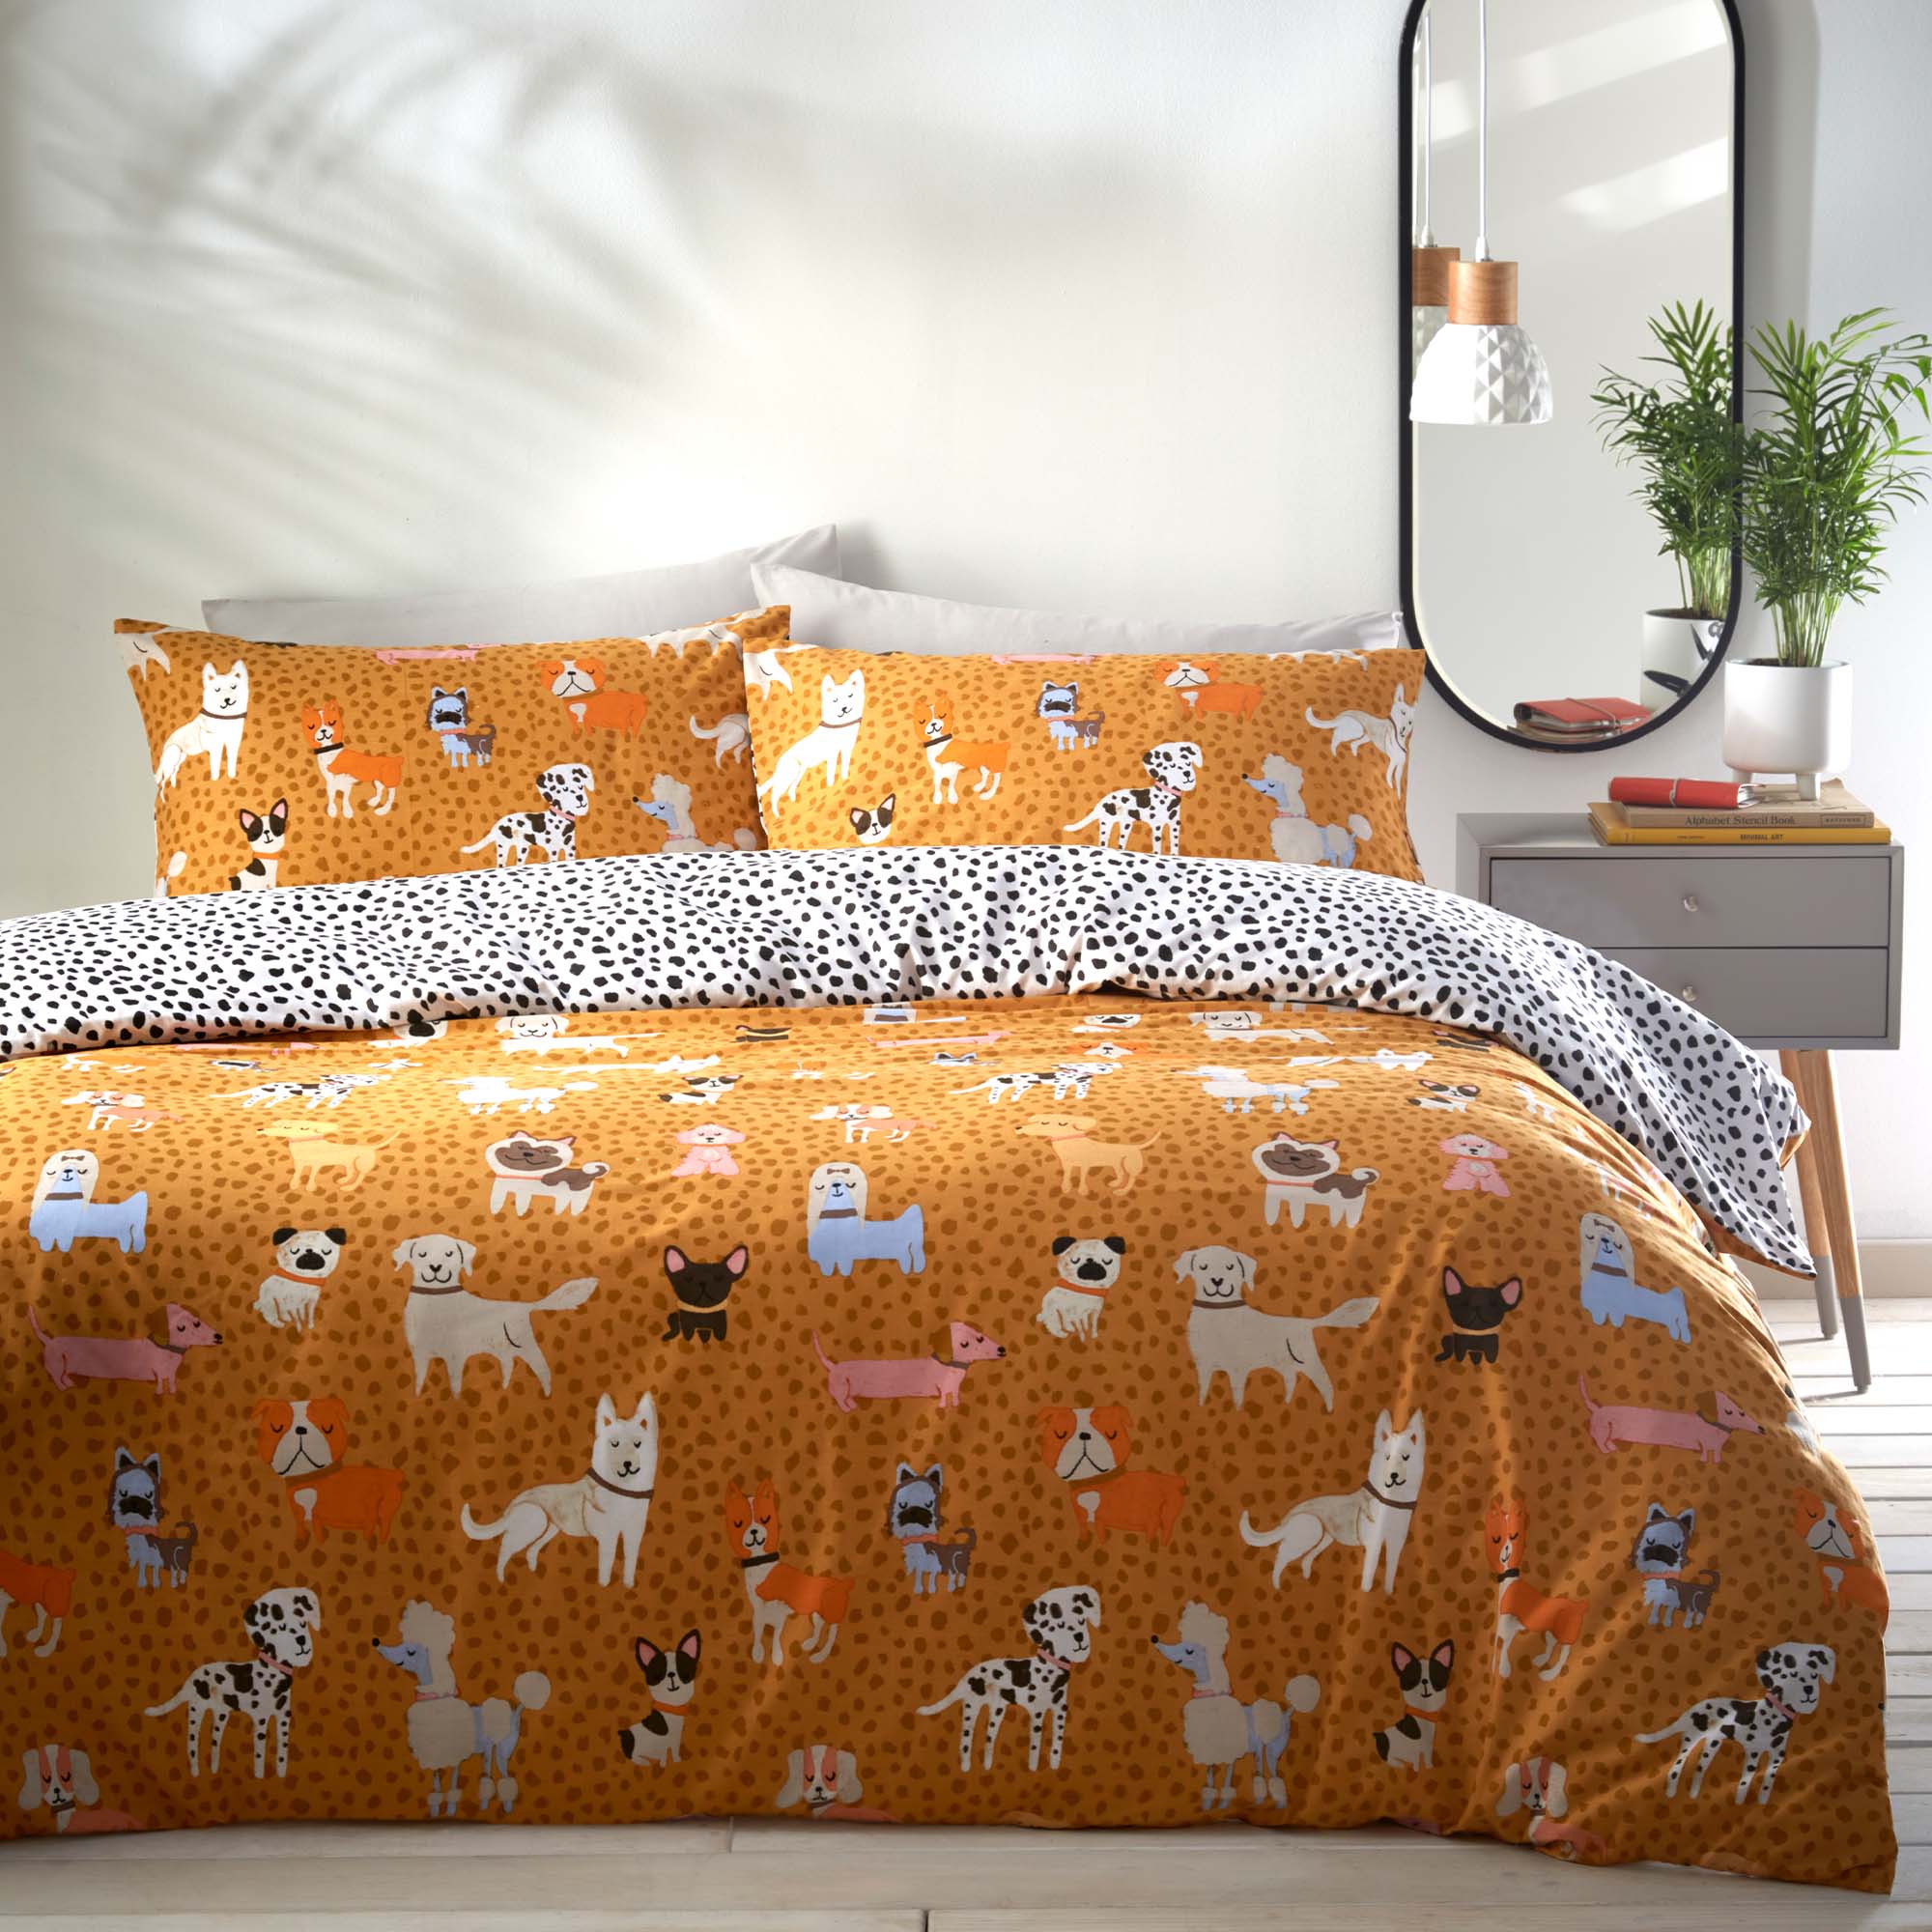 Furn Woofers Reversible Duvet Cover And Pillowcase Set Yellow